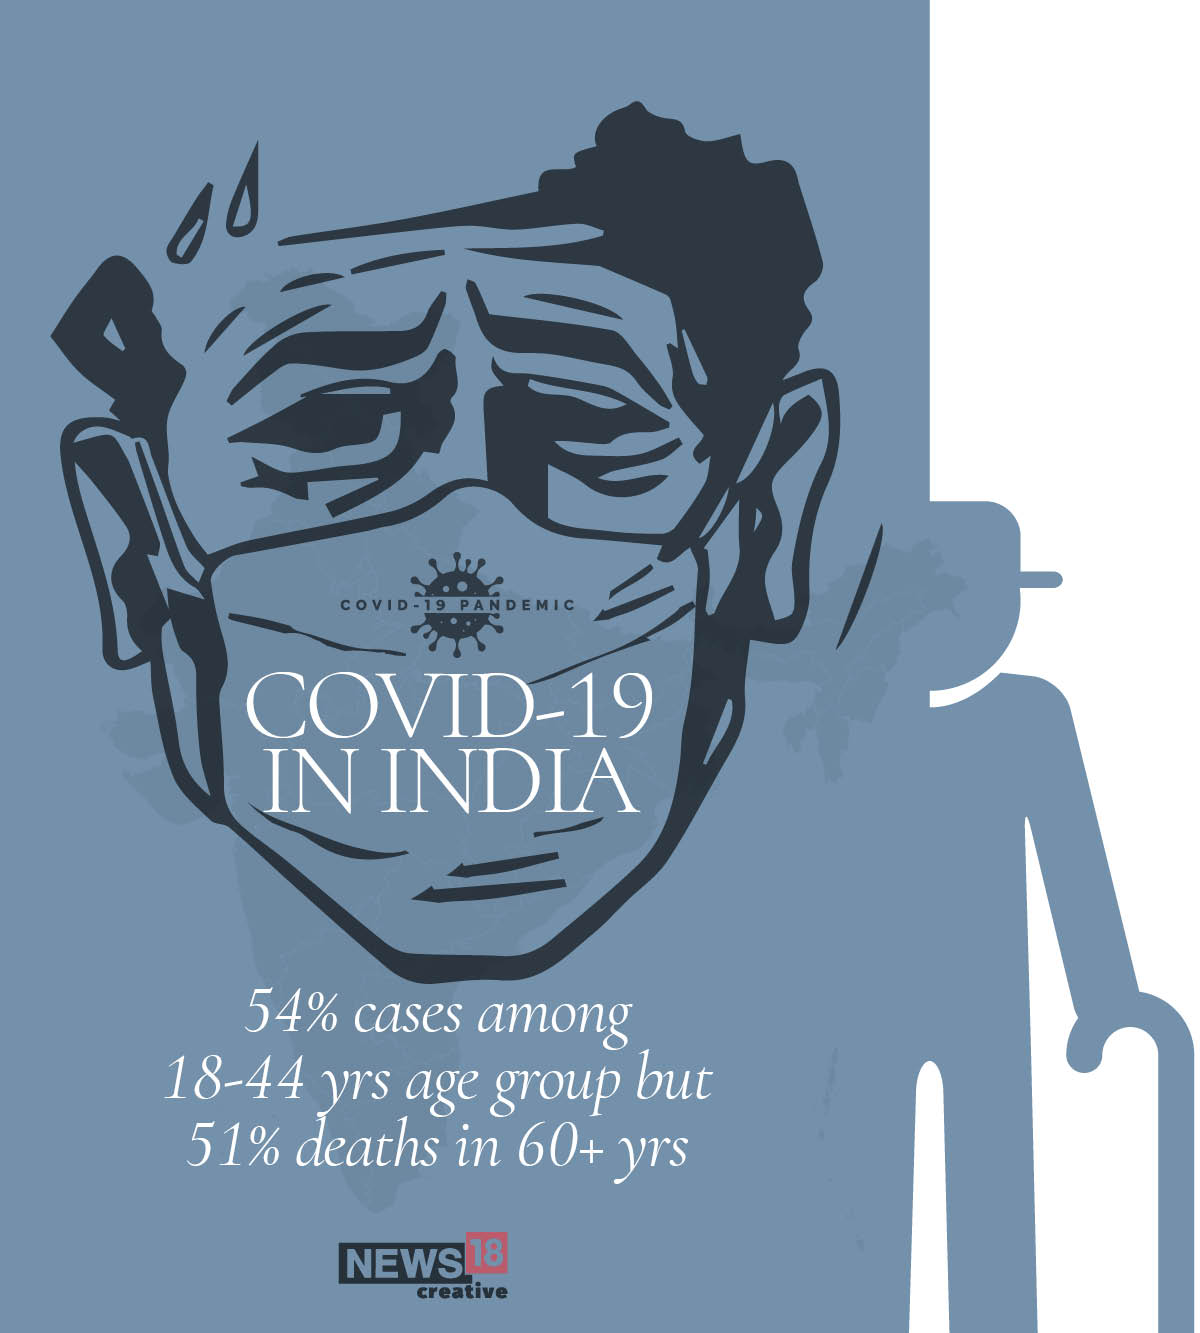 54% of India's Covid-19 cases are in the 18-44 age group